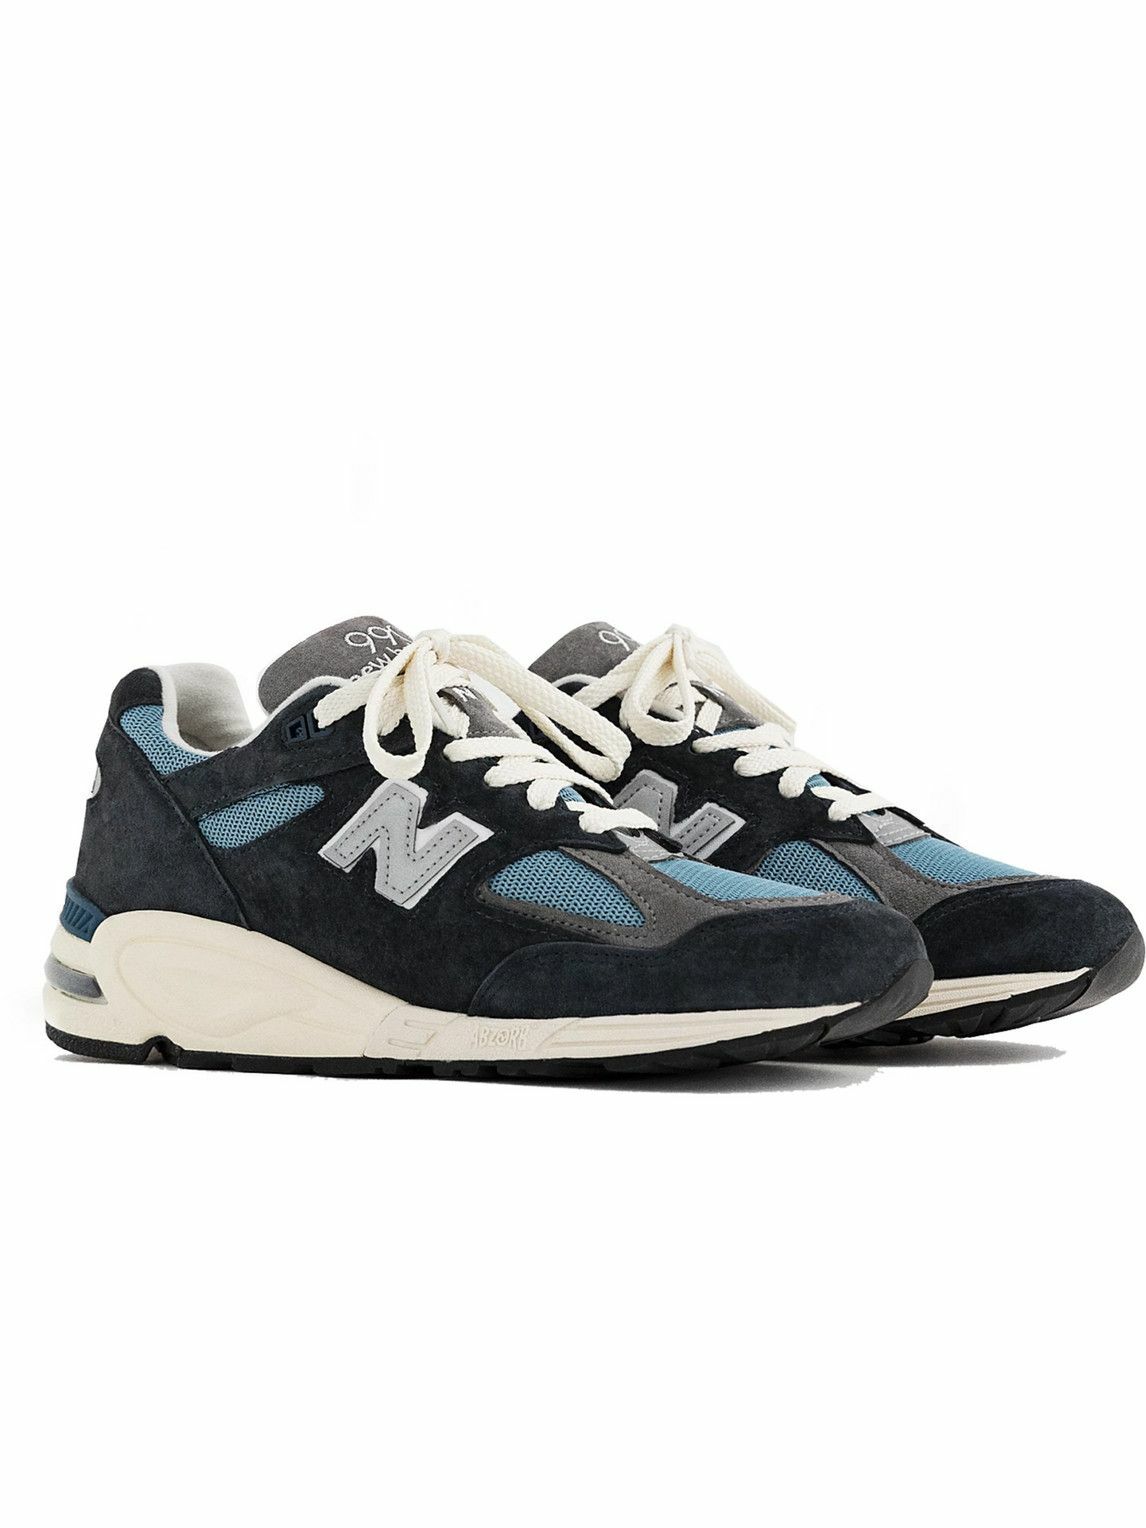 New Balance - Teddy Santis 990v2 Suede and Mesh Sneakers - Blue